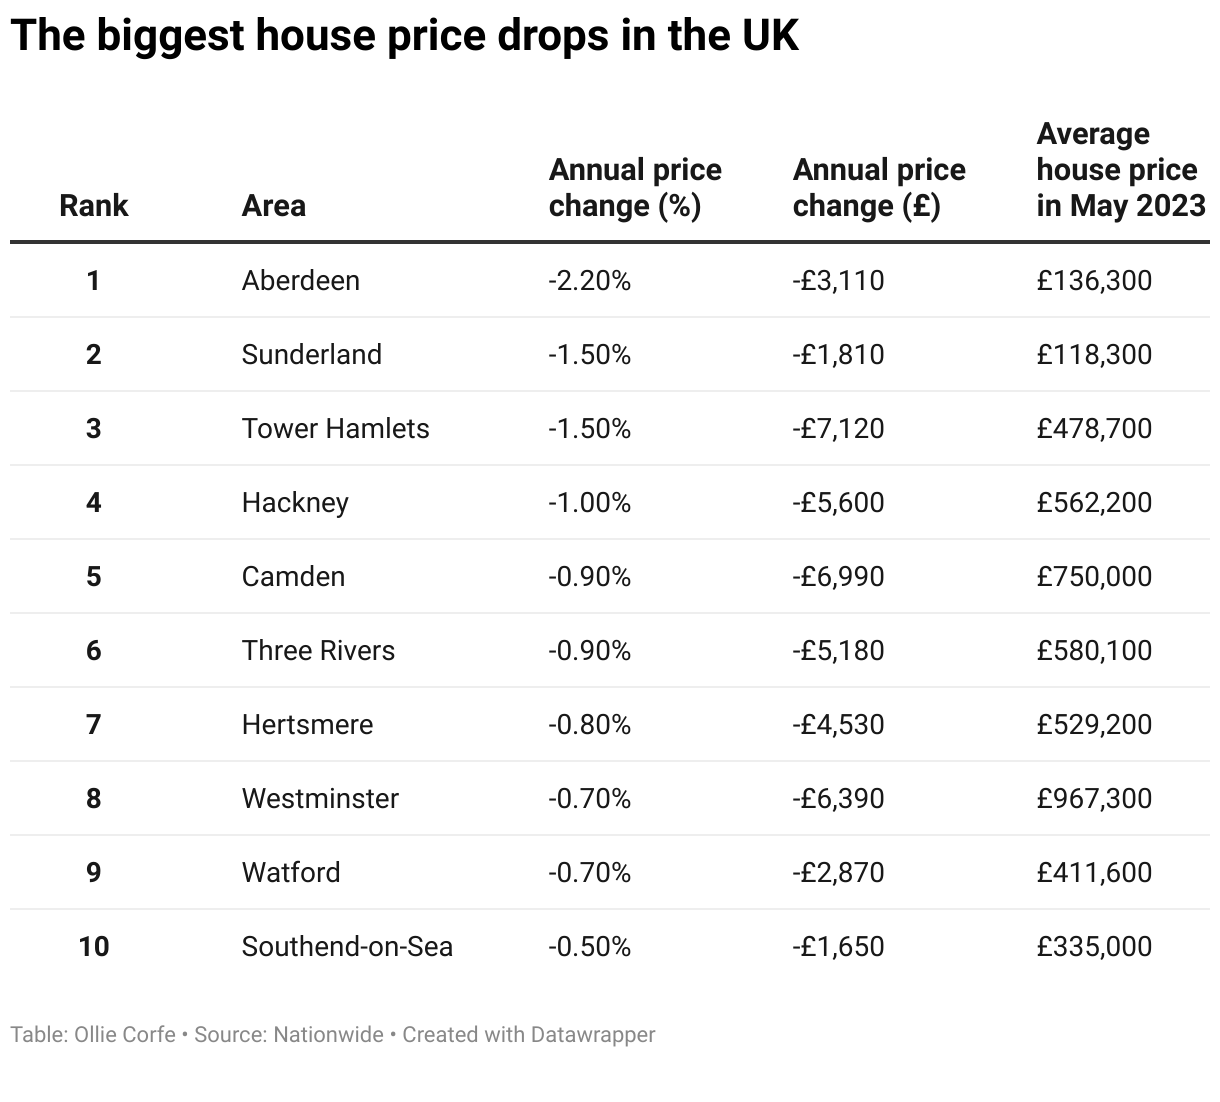 Table of top house price drops.